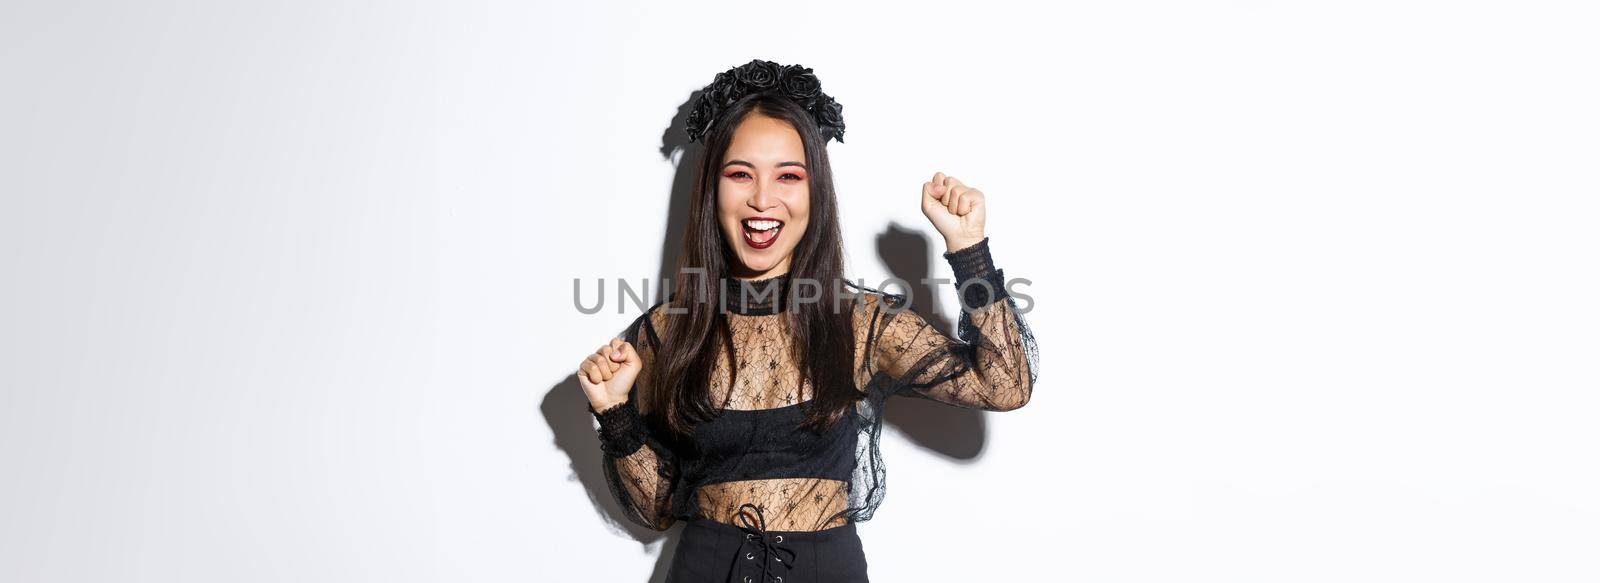 Image of young asian woman having fun on halloween party, raising hand up as rejoicing or triumphing, wearing witch gothic dress, standing over white background.